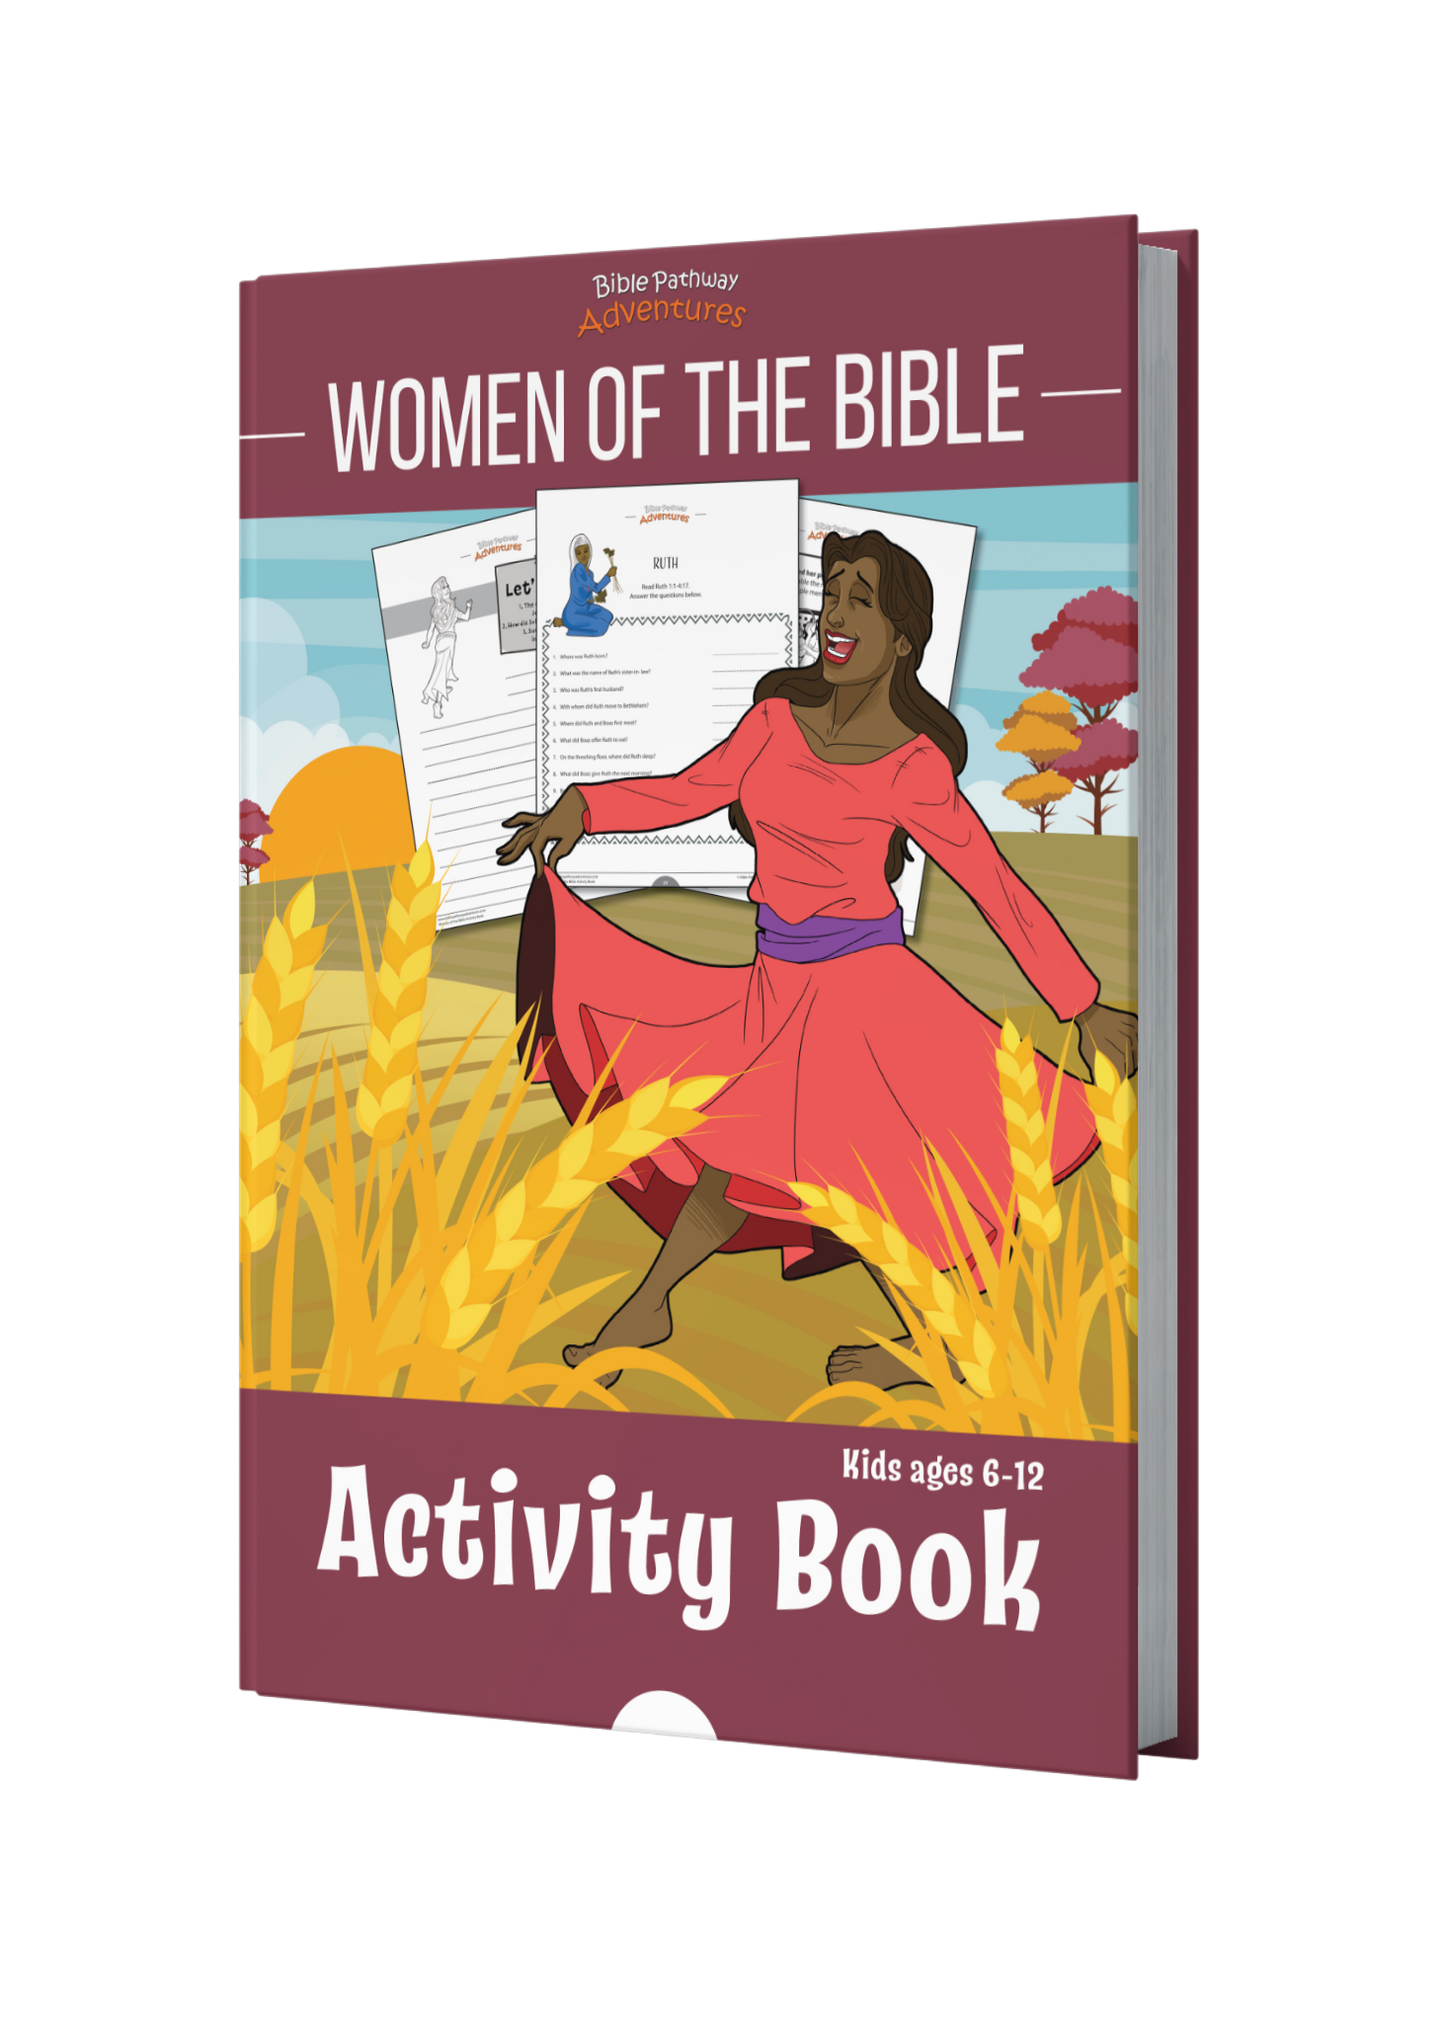 Women of the Bible Activity Book (paperback)